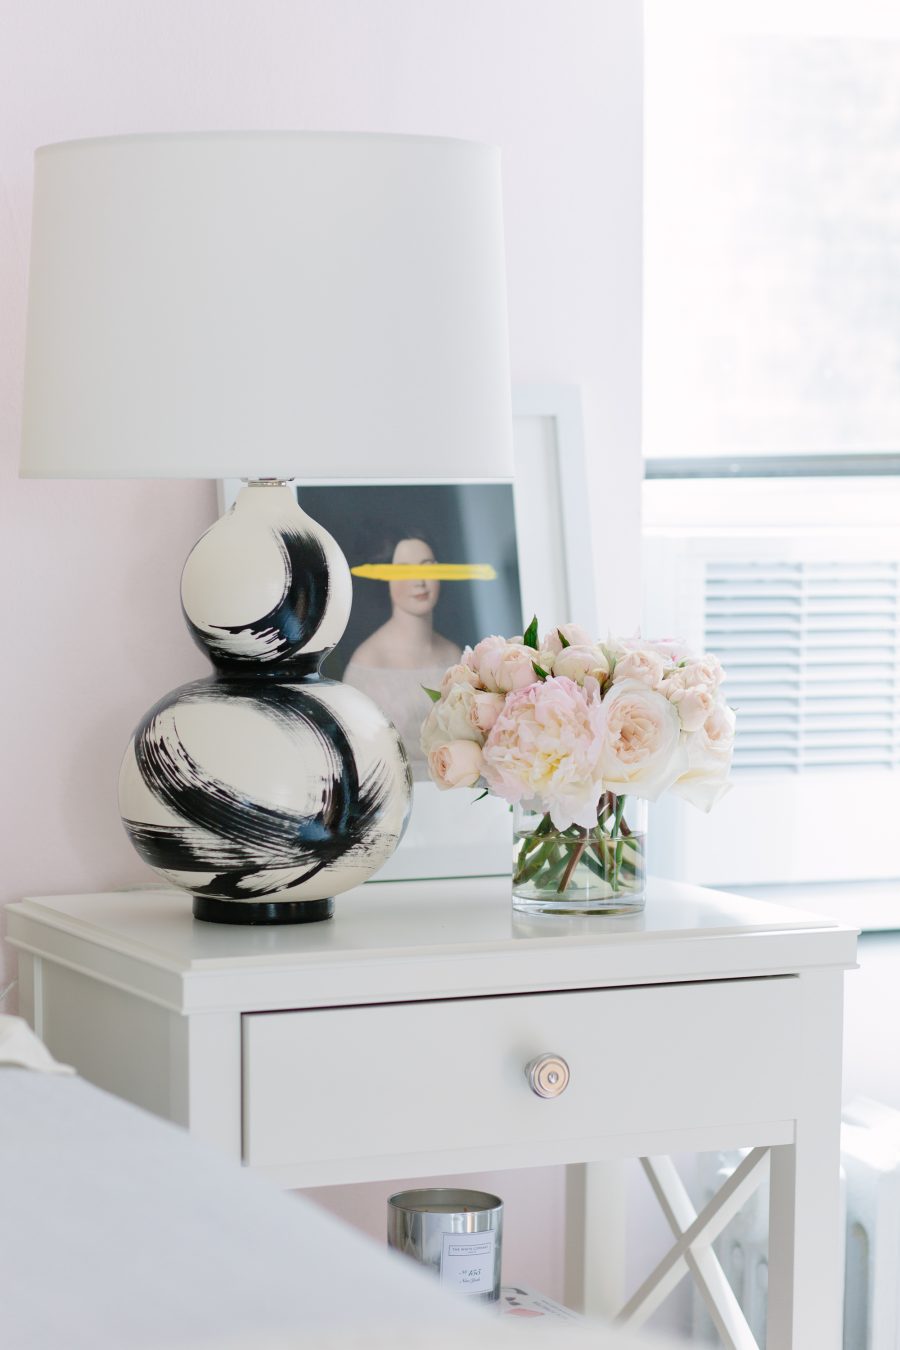 Bunny Williams Brushstroke Table Lamp $950 vs. Safavieh Aileen Table Lamp $109, brushstroke table lamp look for less, copycatchic luxe living for less, budget home decor and design, daily finds, home trends, sales, budget travel and room redos